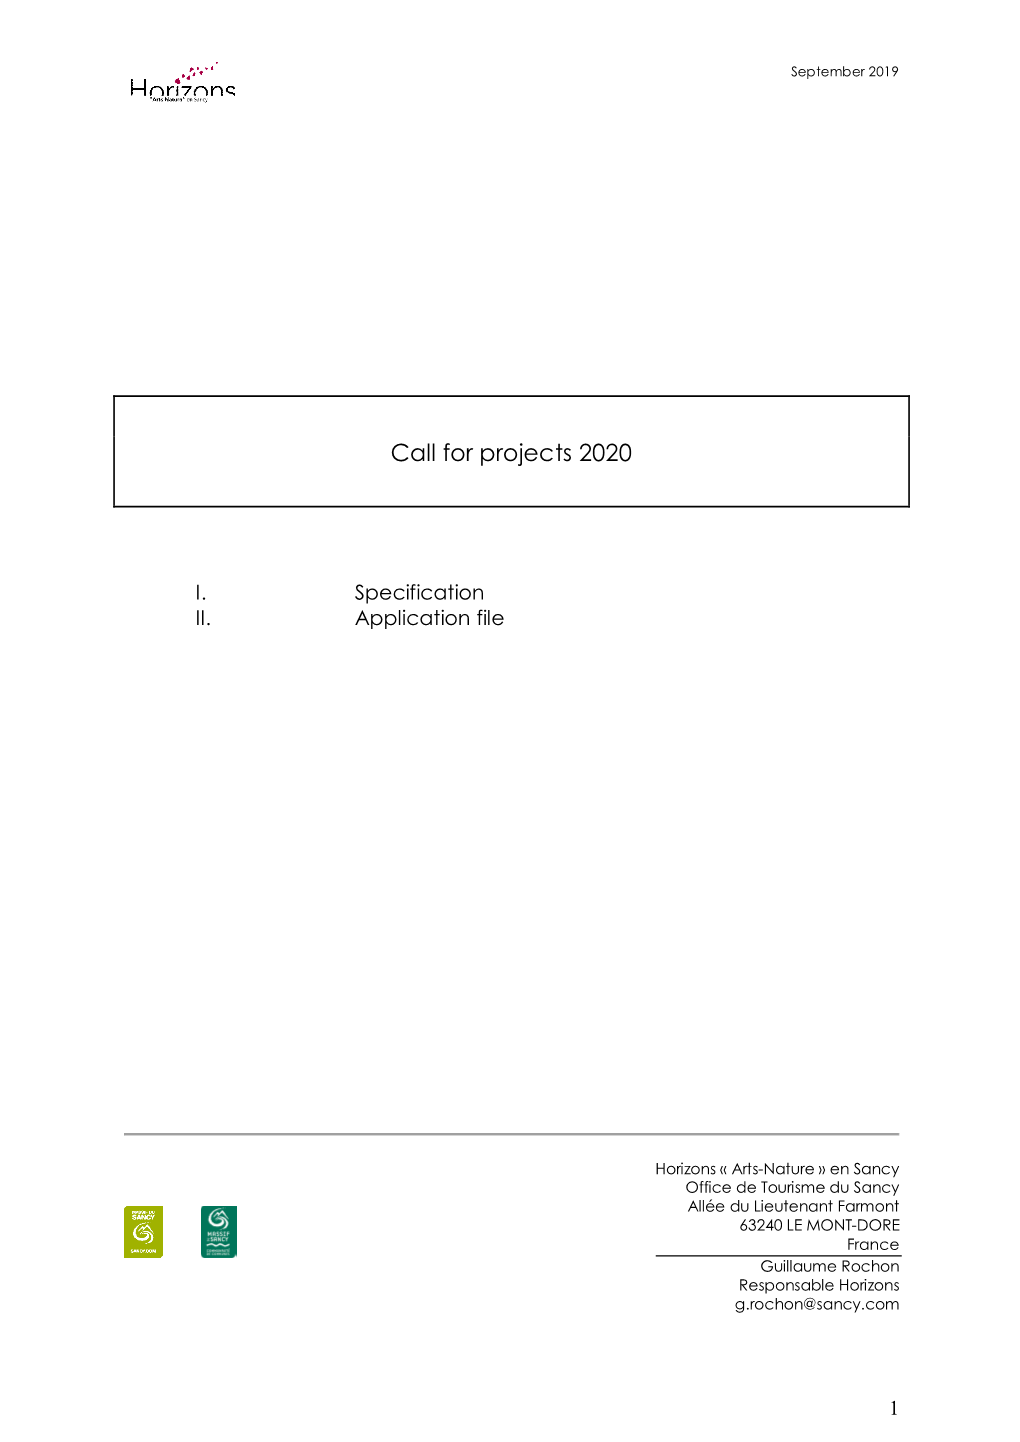 Call for Projects 2020